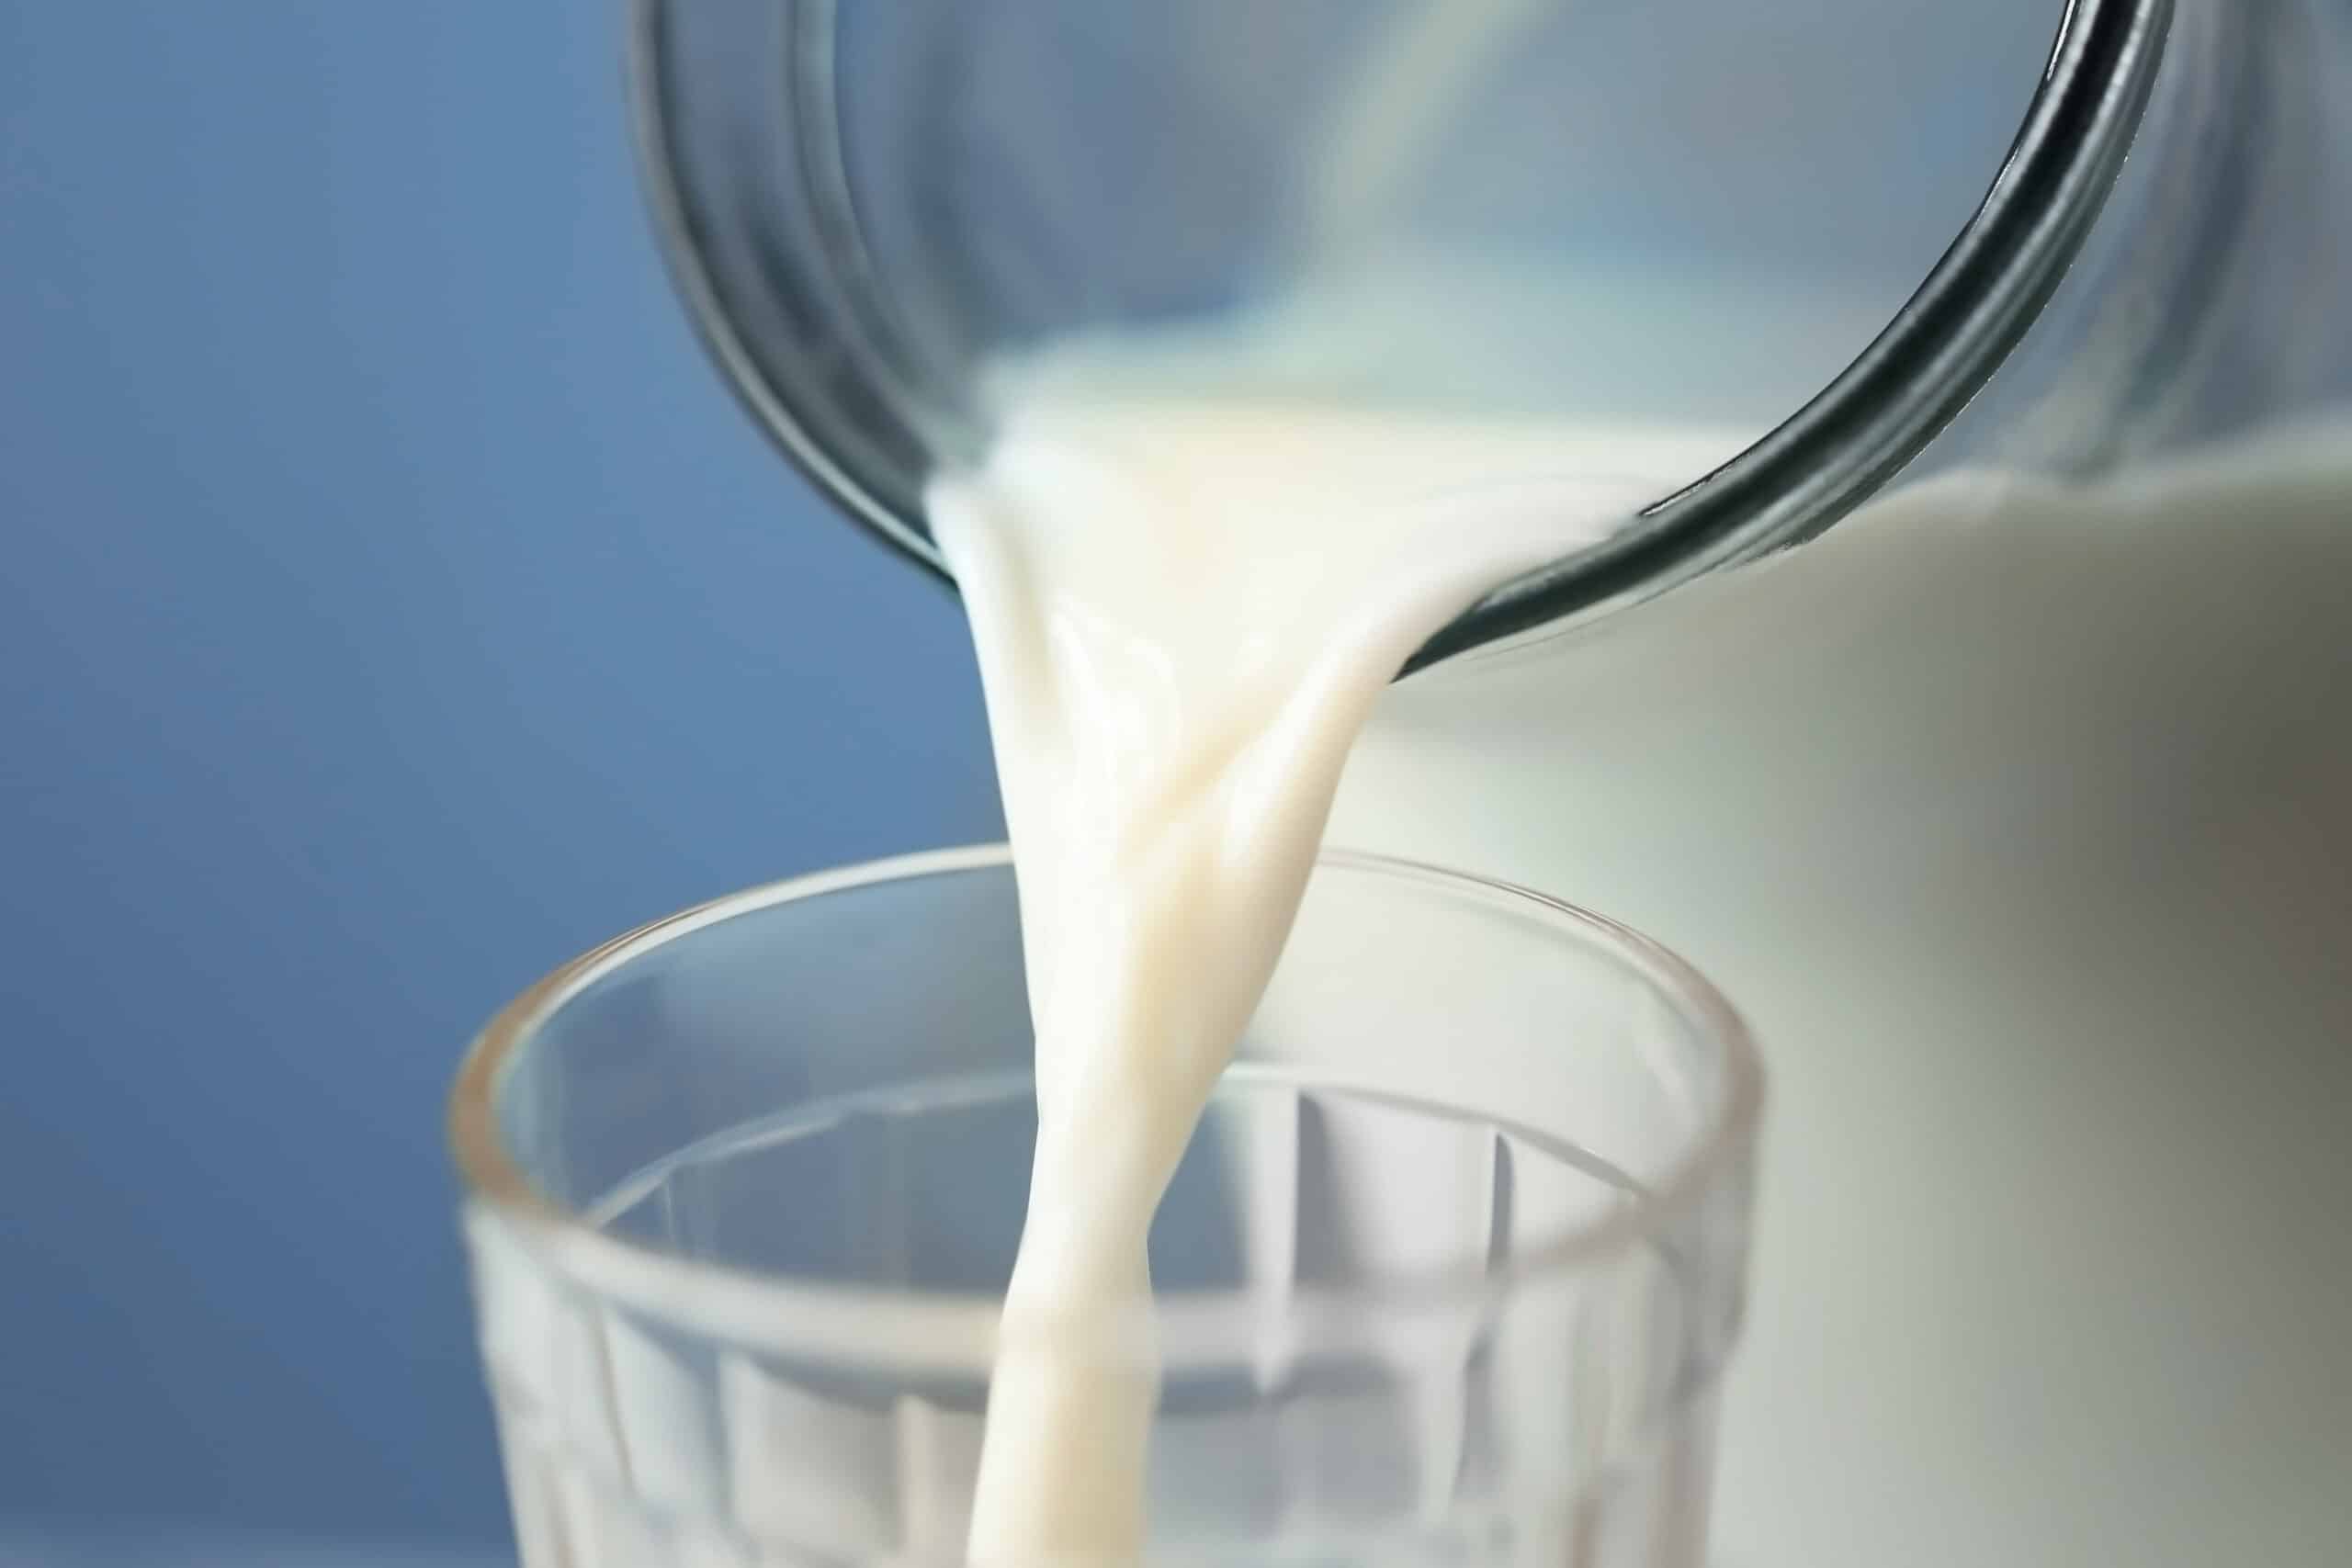 Milk pouring into a glass